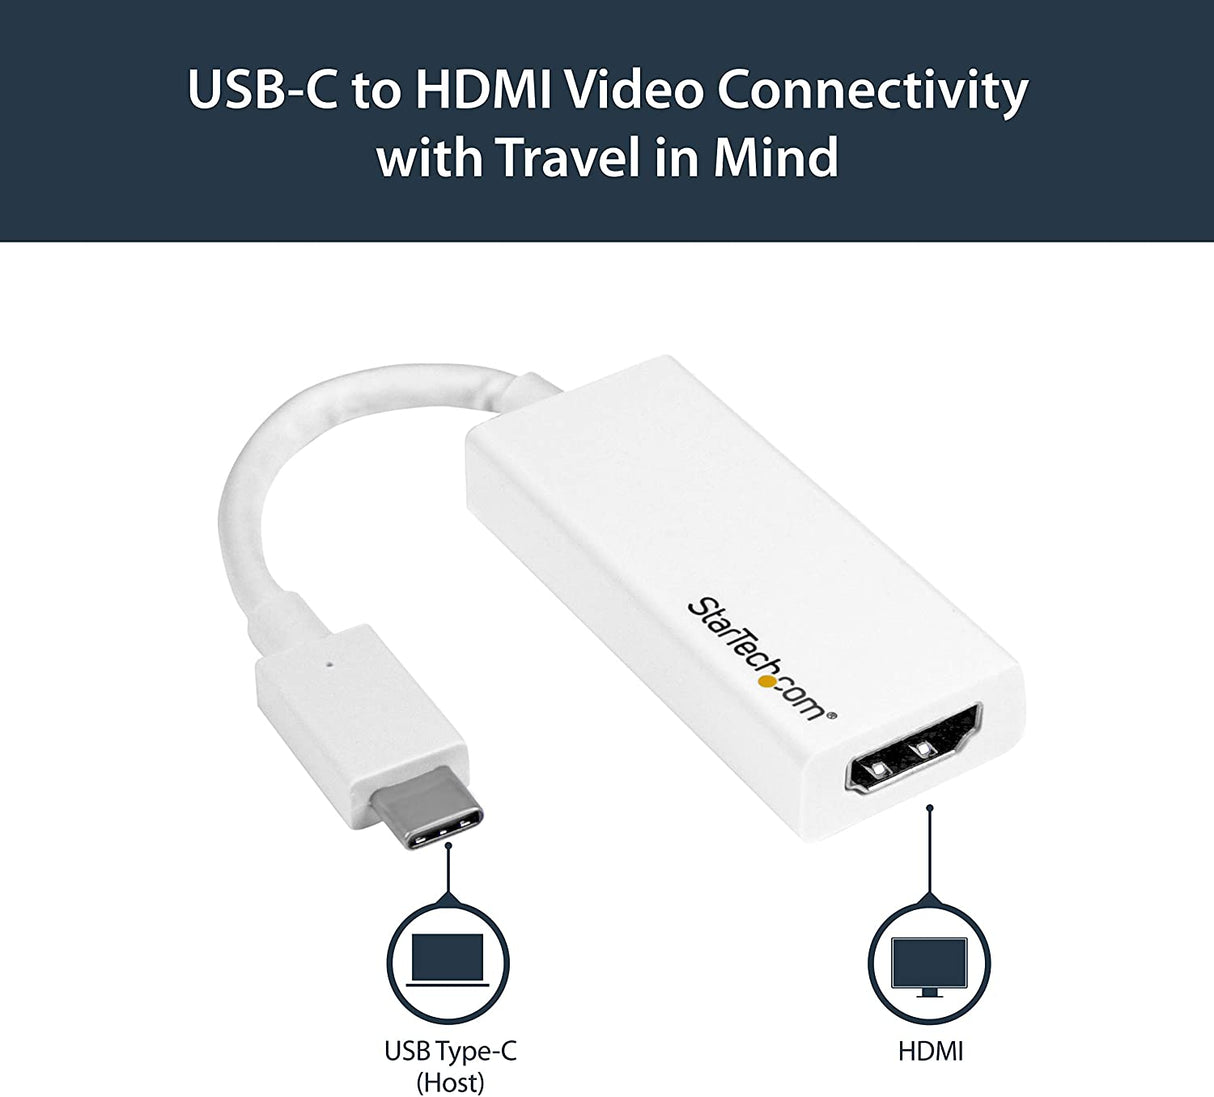 StarTech.com USB C to HDMI Adapter - White - 4K 60Hz - Thunderbolt 3 Compatible - USB Type C to HDMI Dongle Converter (CDP2HD4K60W) White 4K 60Hz